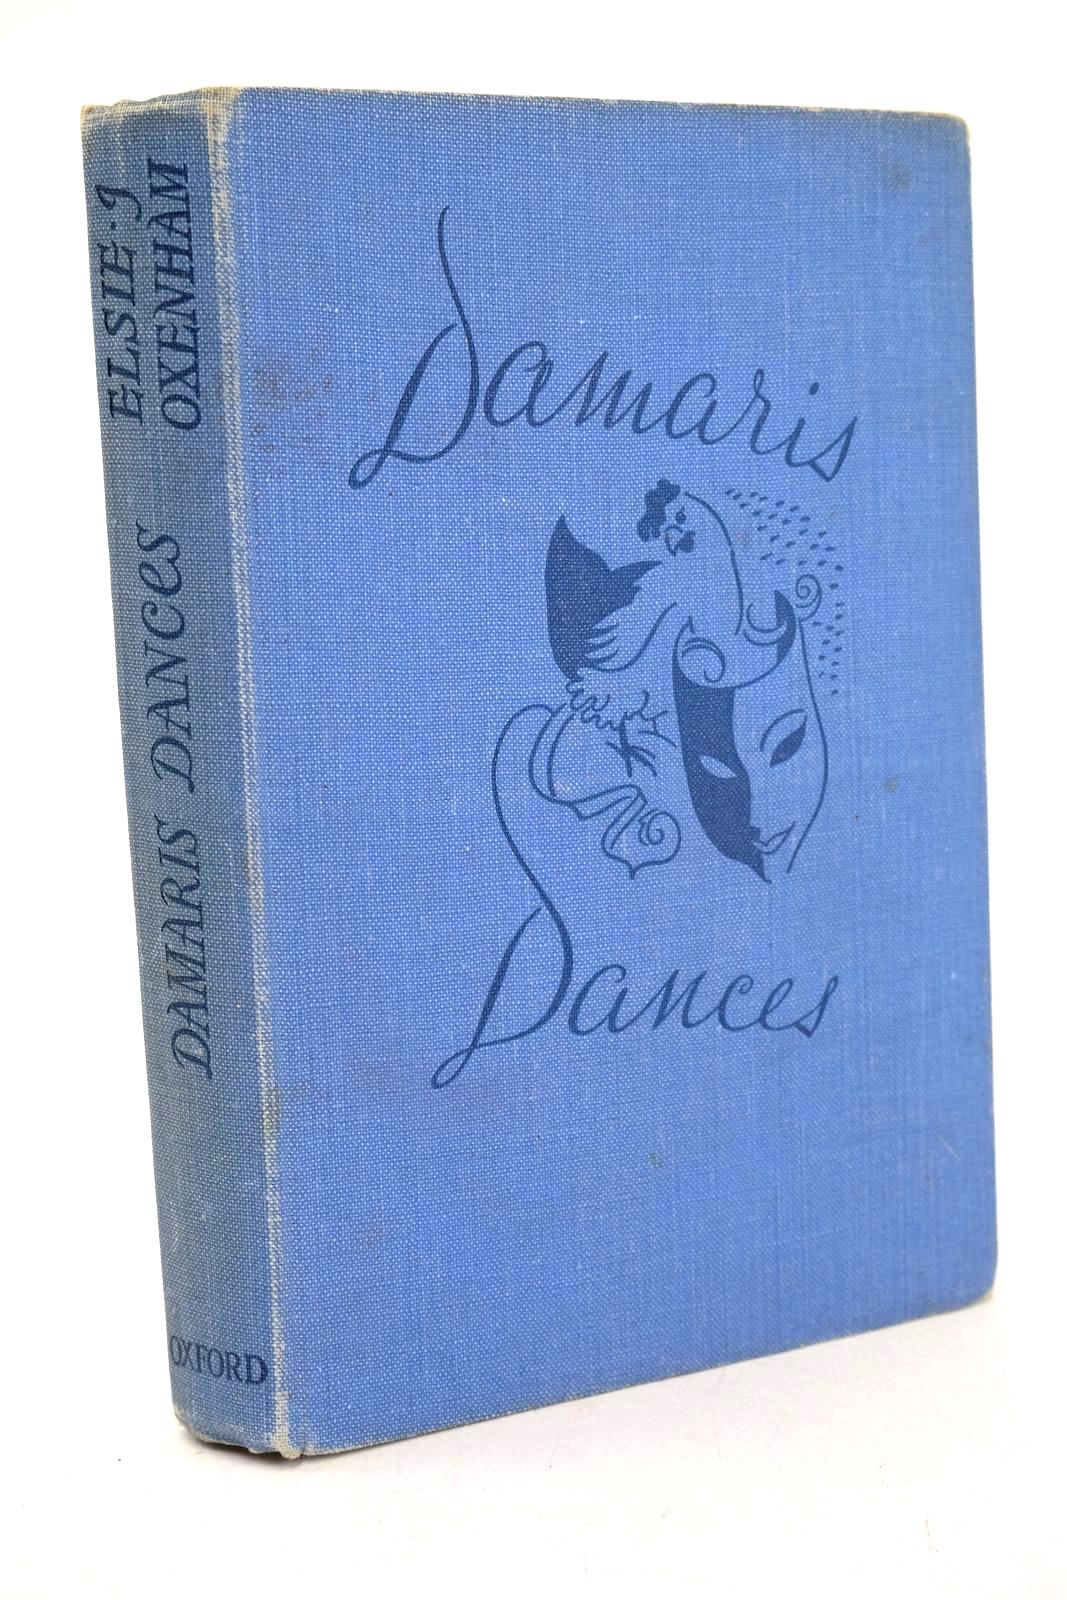 Photo of DAMARIS DANCES written by Oxenham, Elsie J. illustrated by Horder, Margaret published by Oxford University Press (STOCK CODE: 1327247)  for sale by Stella & Rose's Books